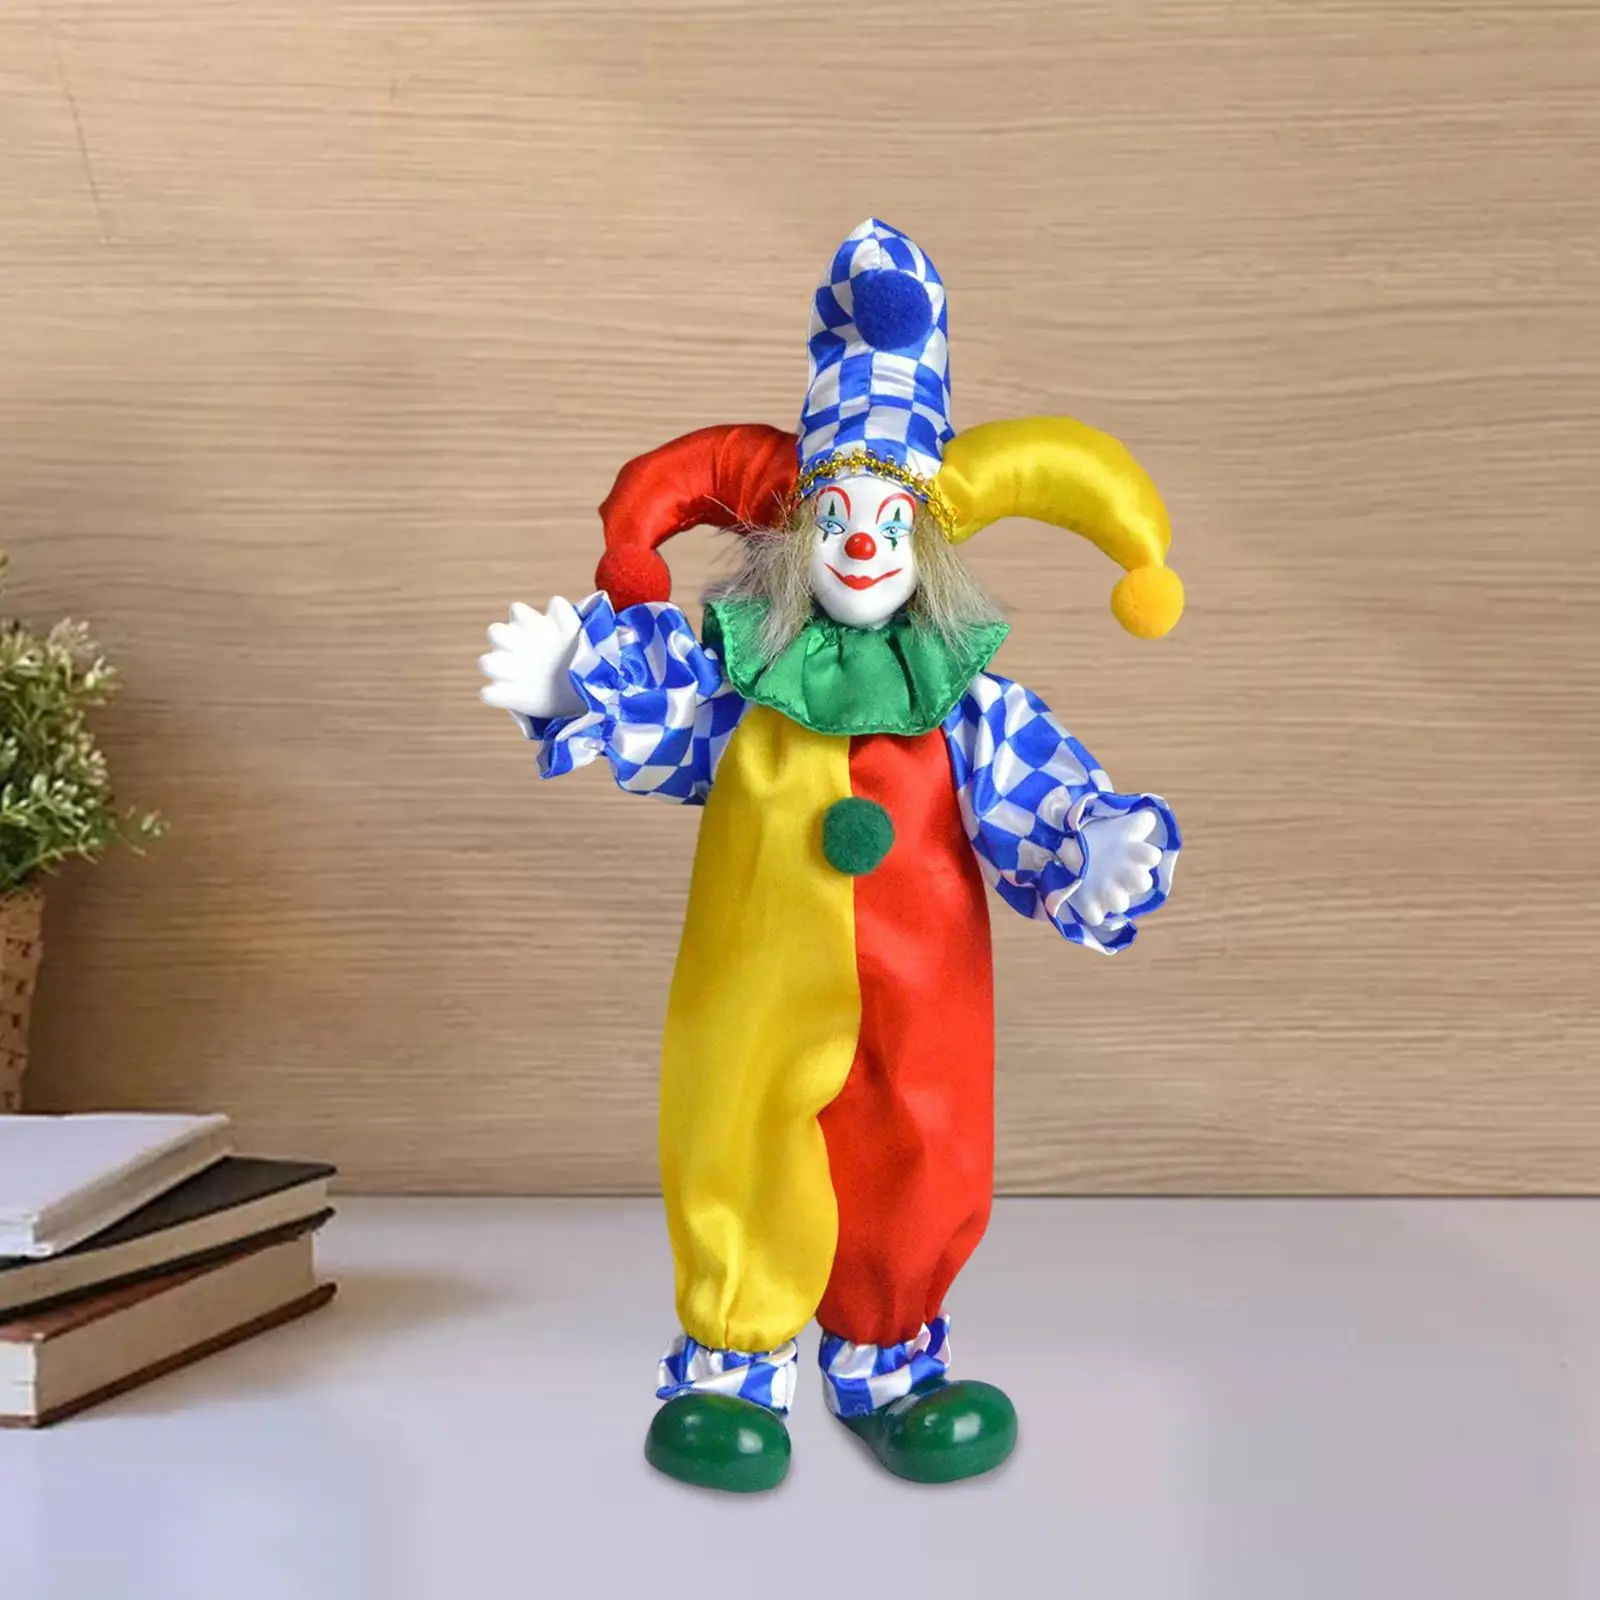 24cm Tall Clown Doll Figure Movable Decorative for Living Room Office Gifts